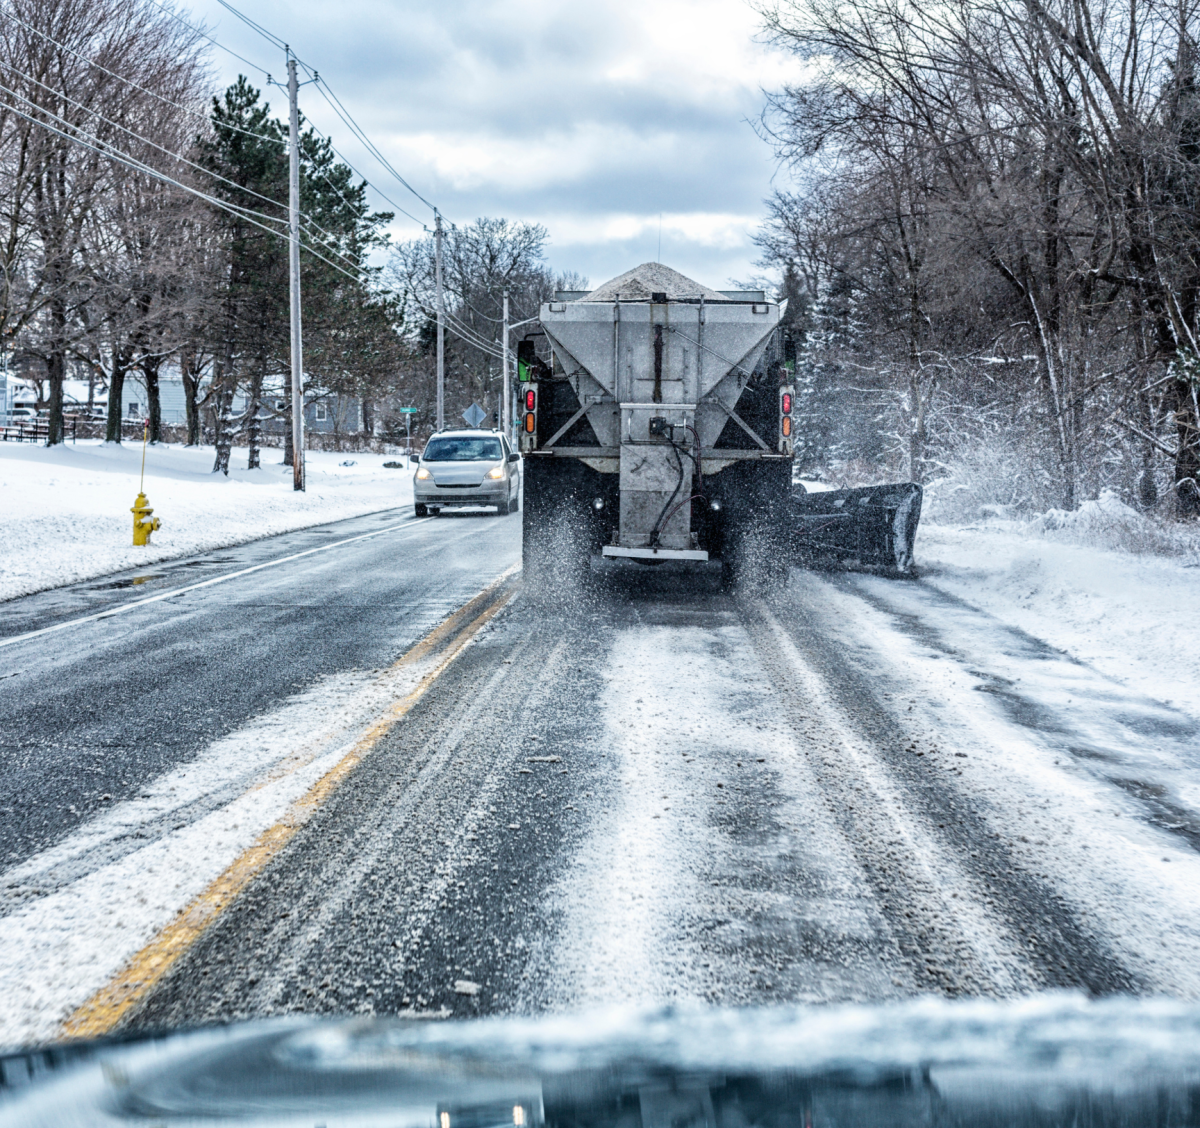 Read up on helpful tips to deal with road salt.